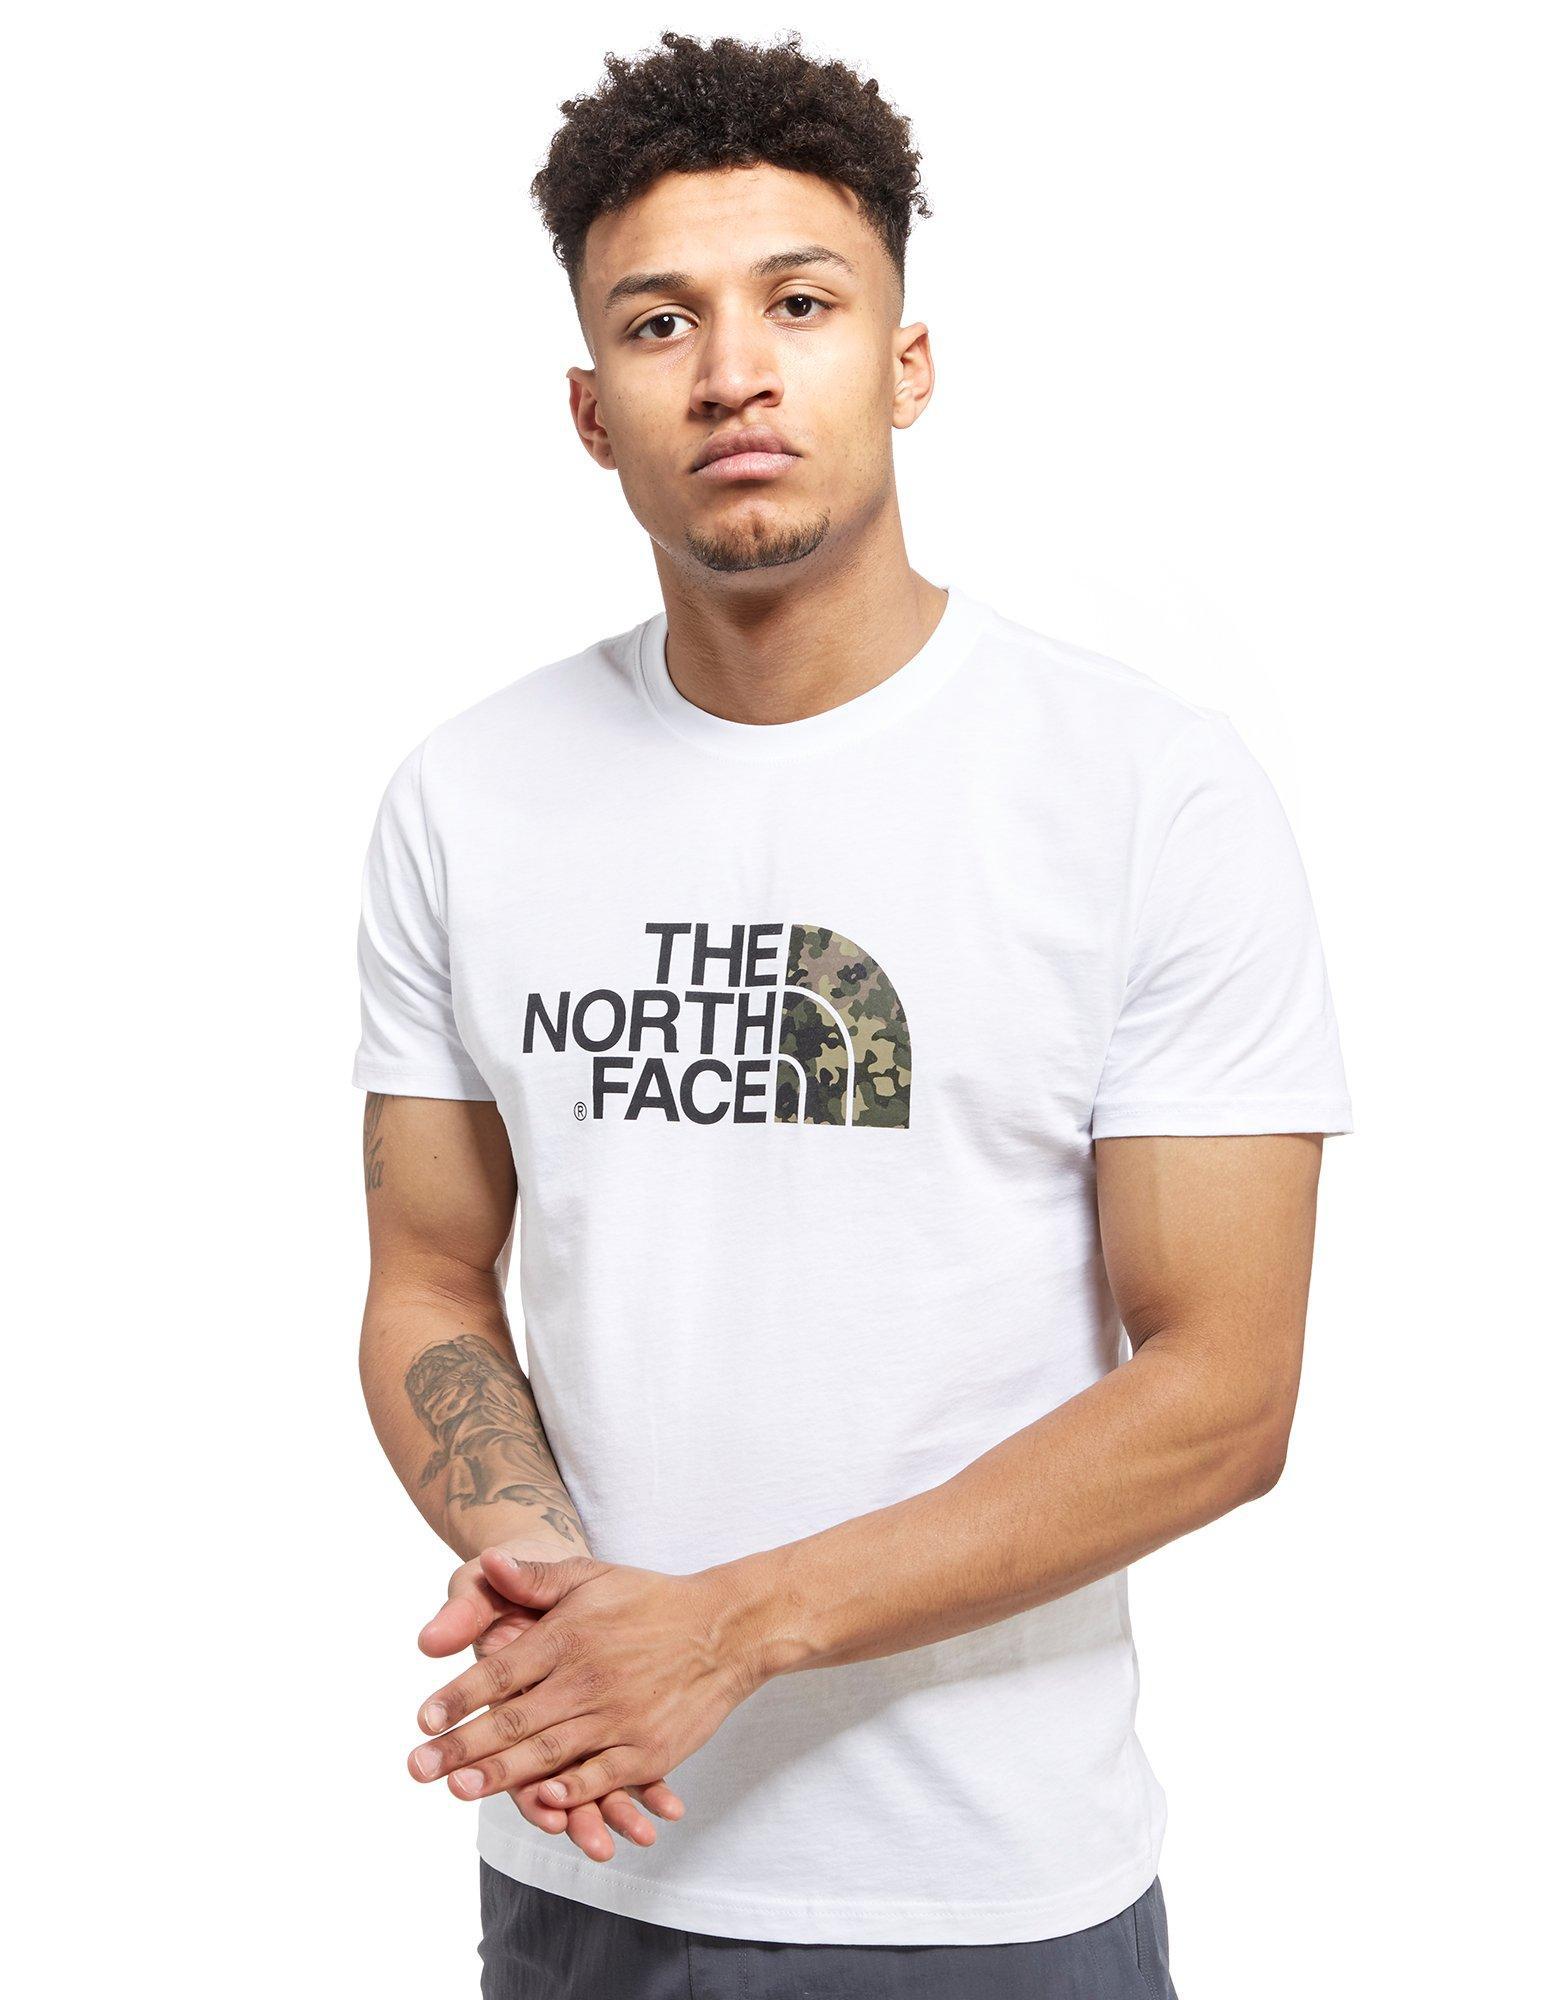 The North Face Cotton T-shirt in White 